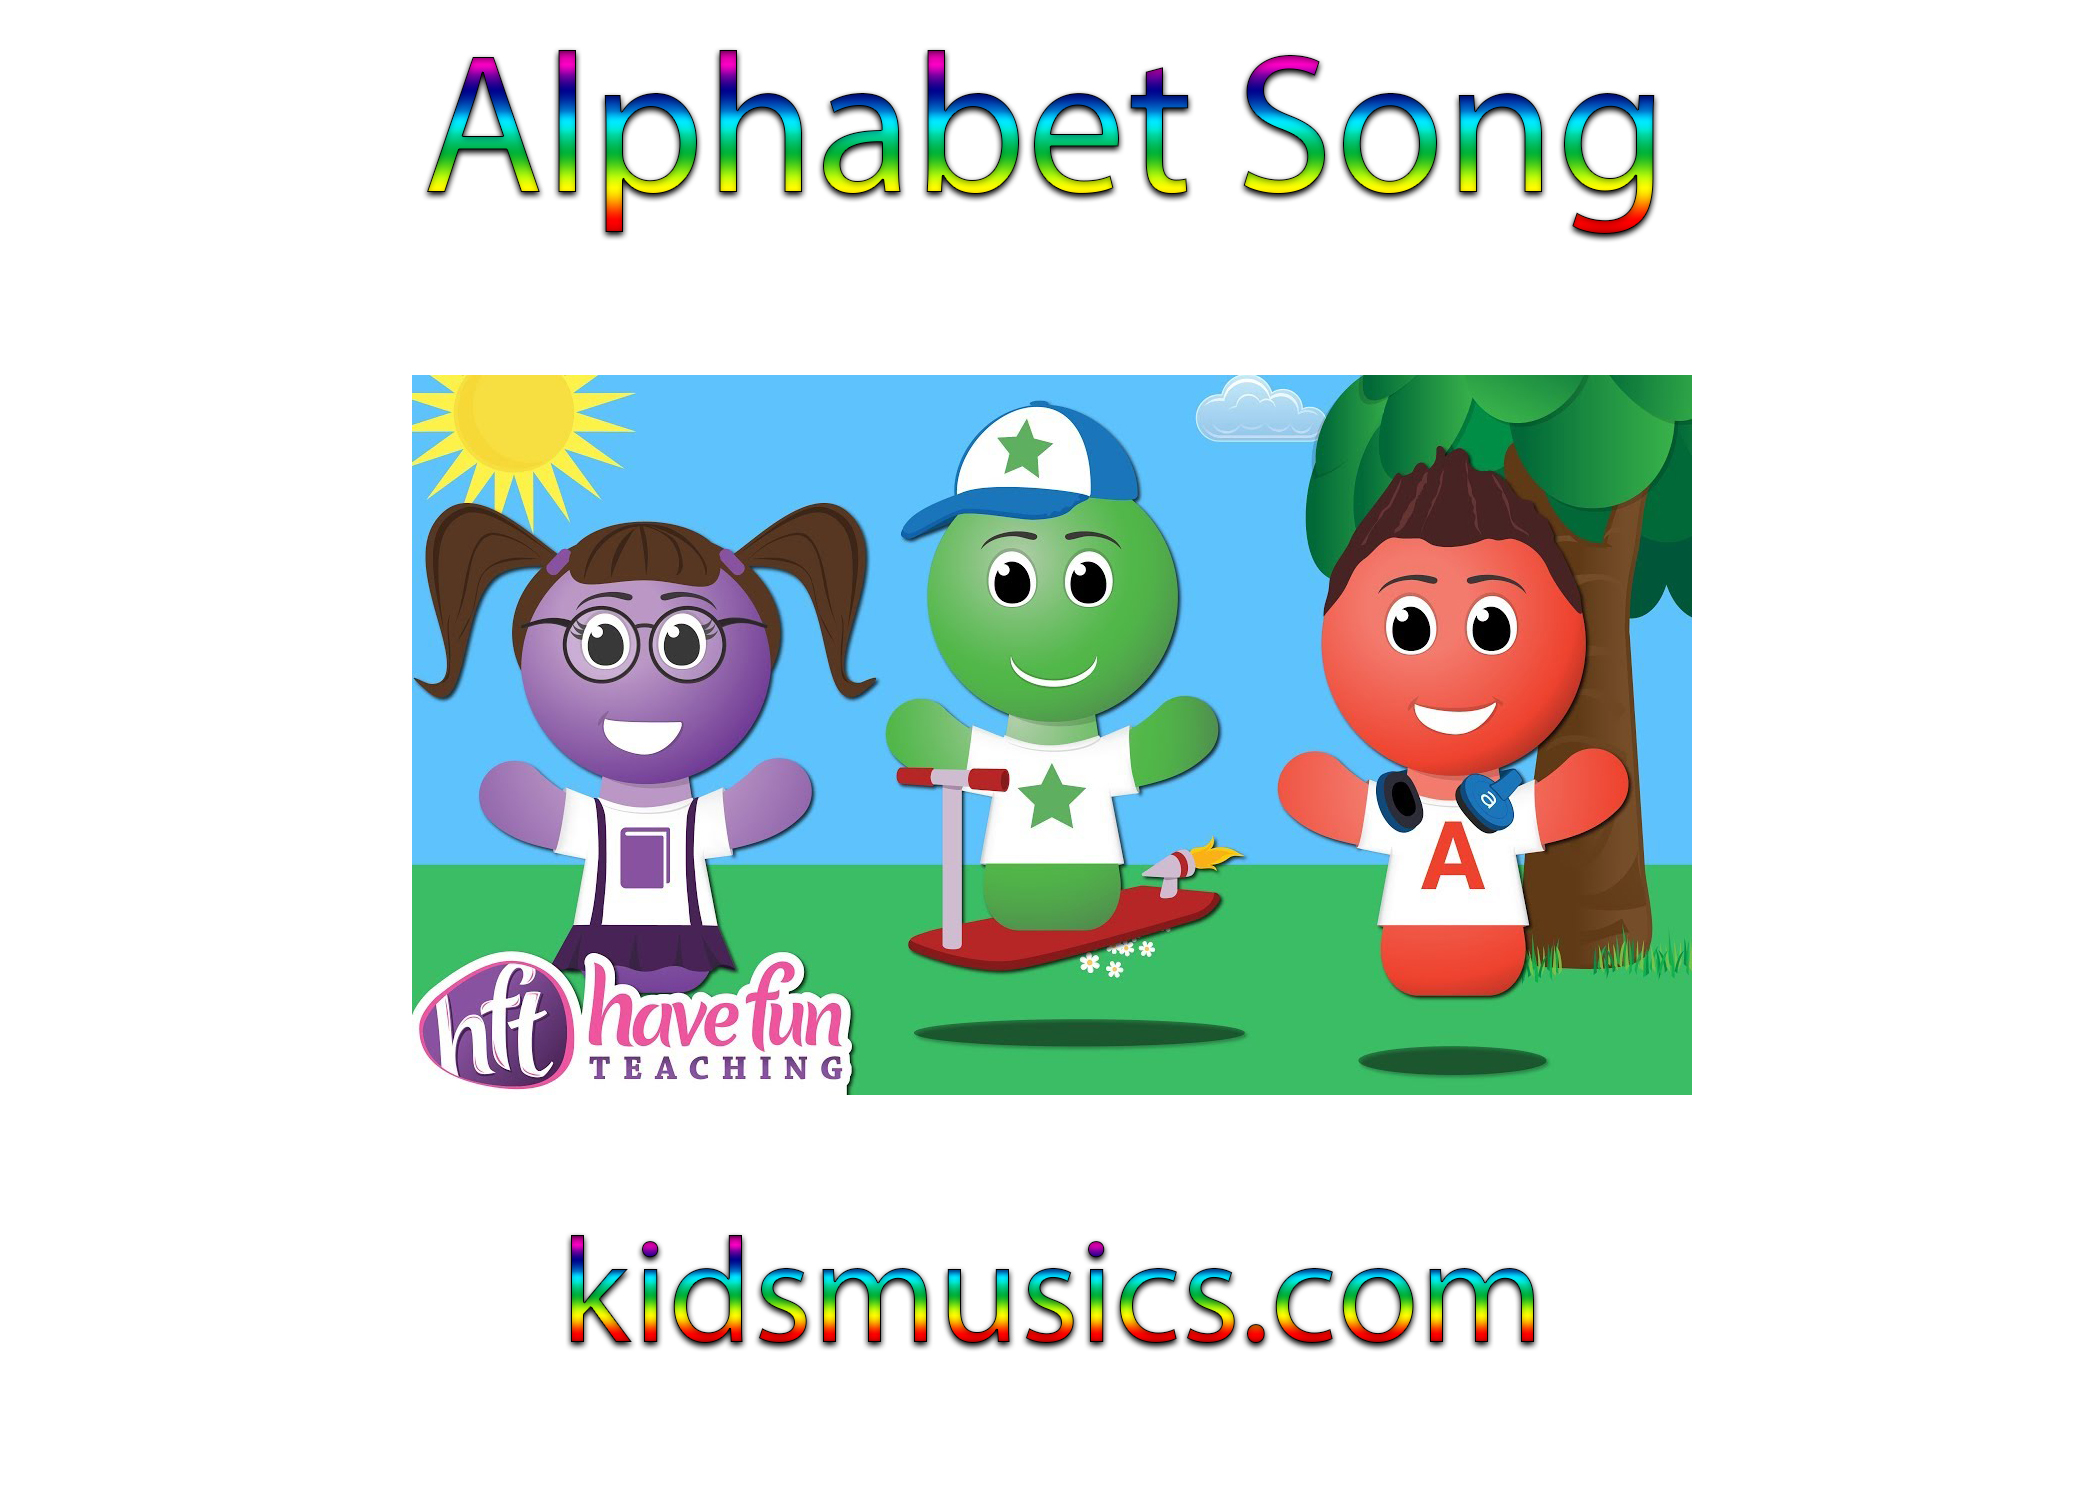 Kidsmusics Alphabet Song Free Download Mp4 Video 720p Mp3